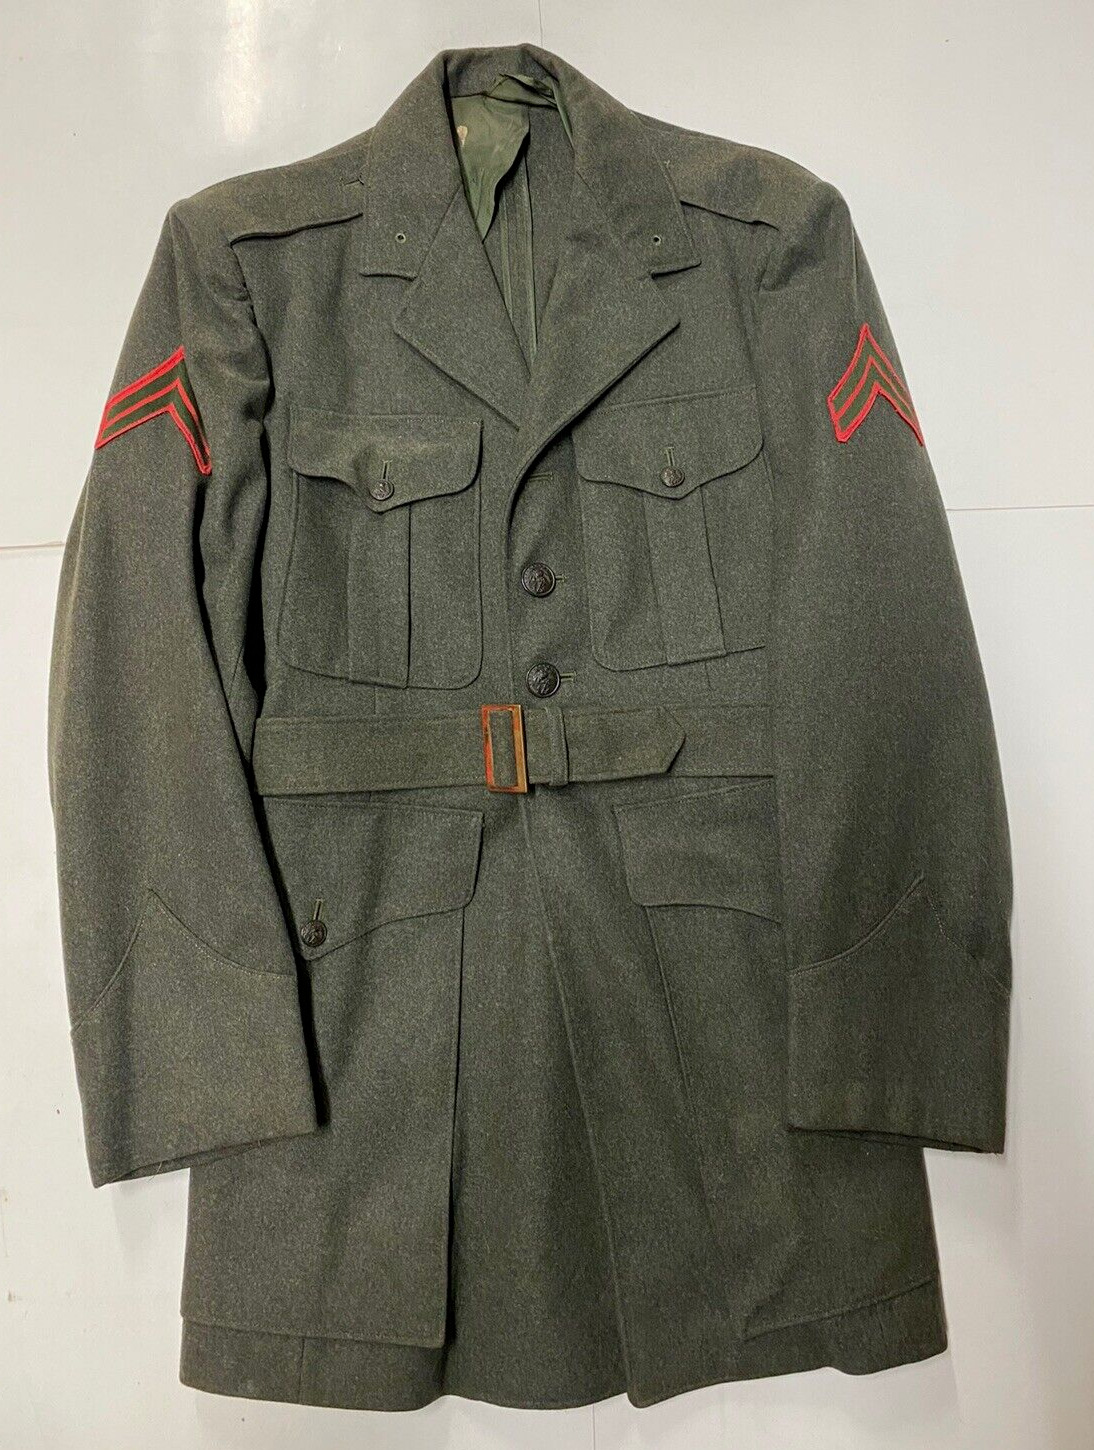 Vintage Wool Army Jacket Mens Small USMC Patched WWII Dress Uniform Belted